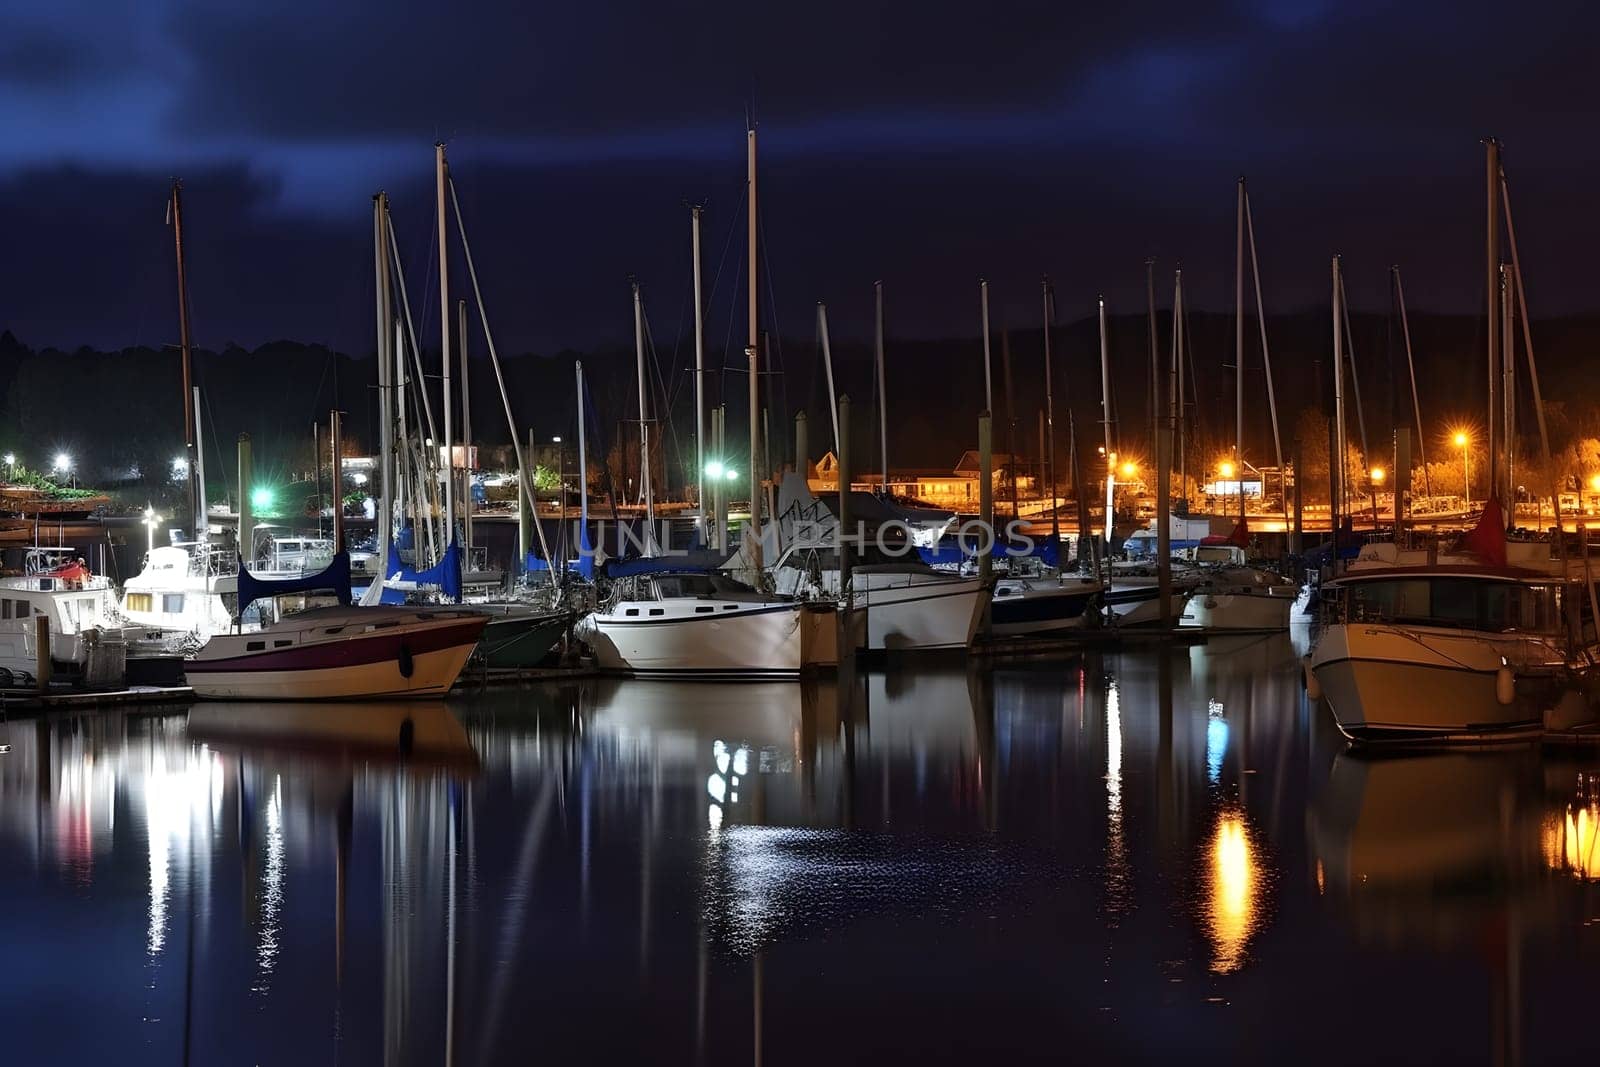 Boats in the harbor at night, neural network generated image by z1b